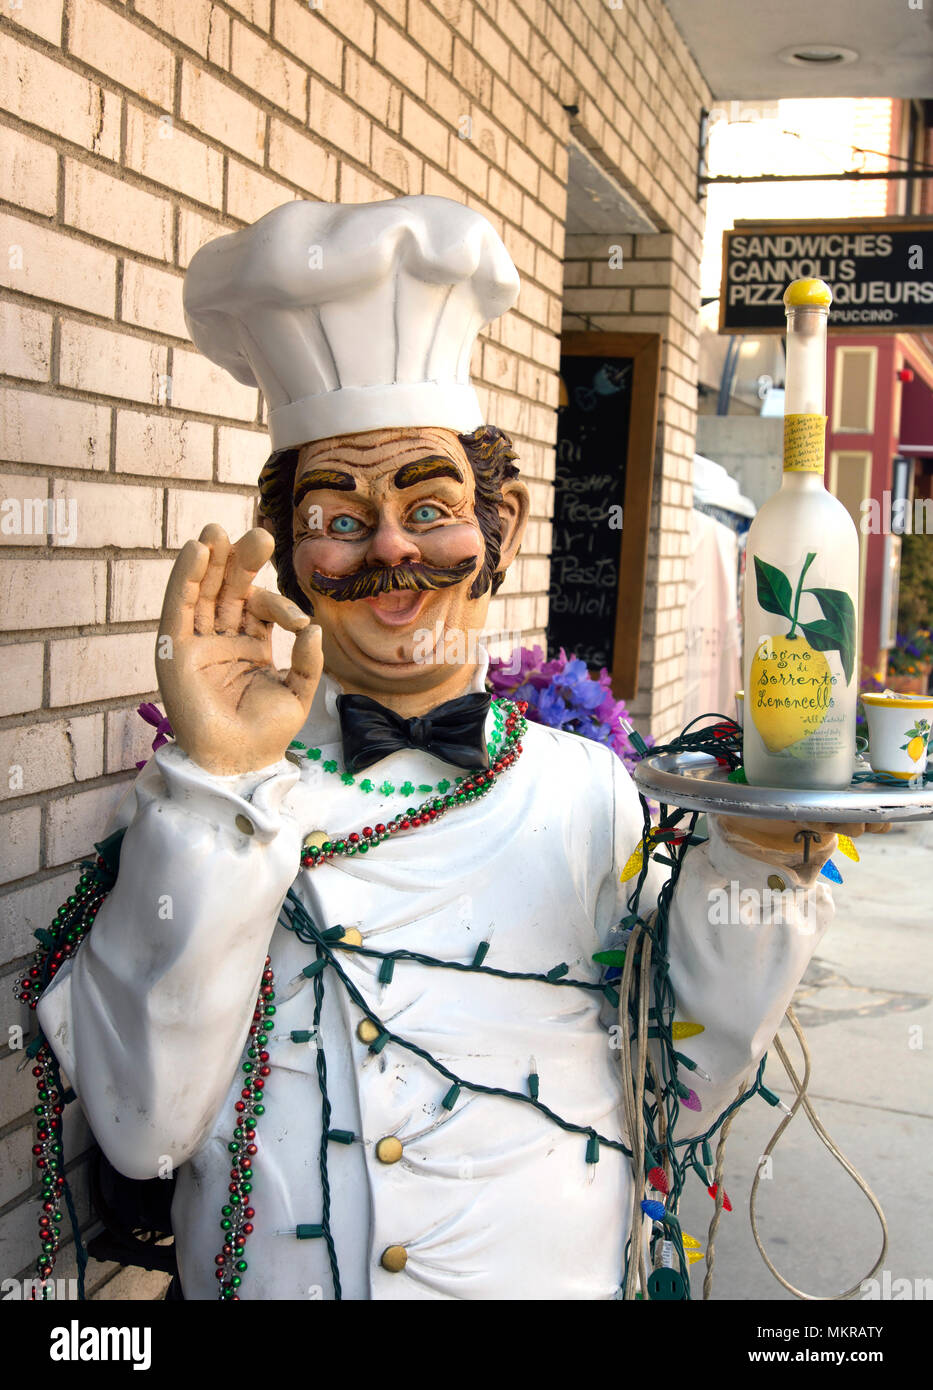 A chef mannequin in front of a North End restaurant in Boston's North End, Massachusetts, USA Stock Photo